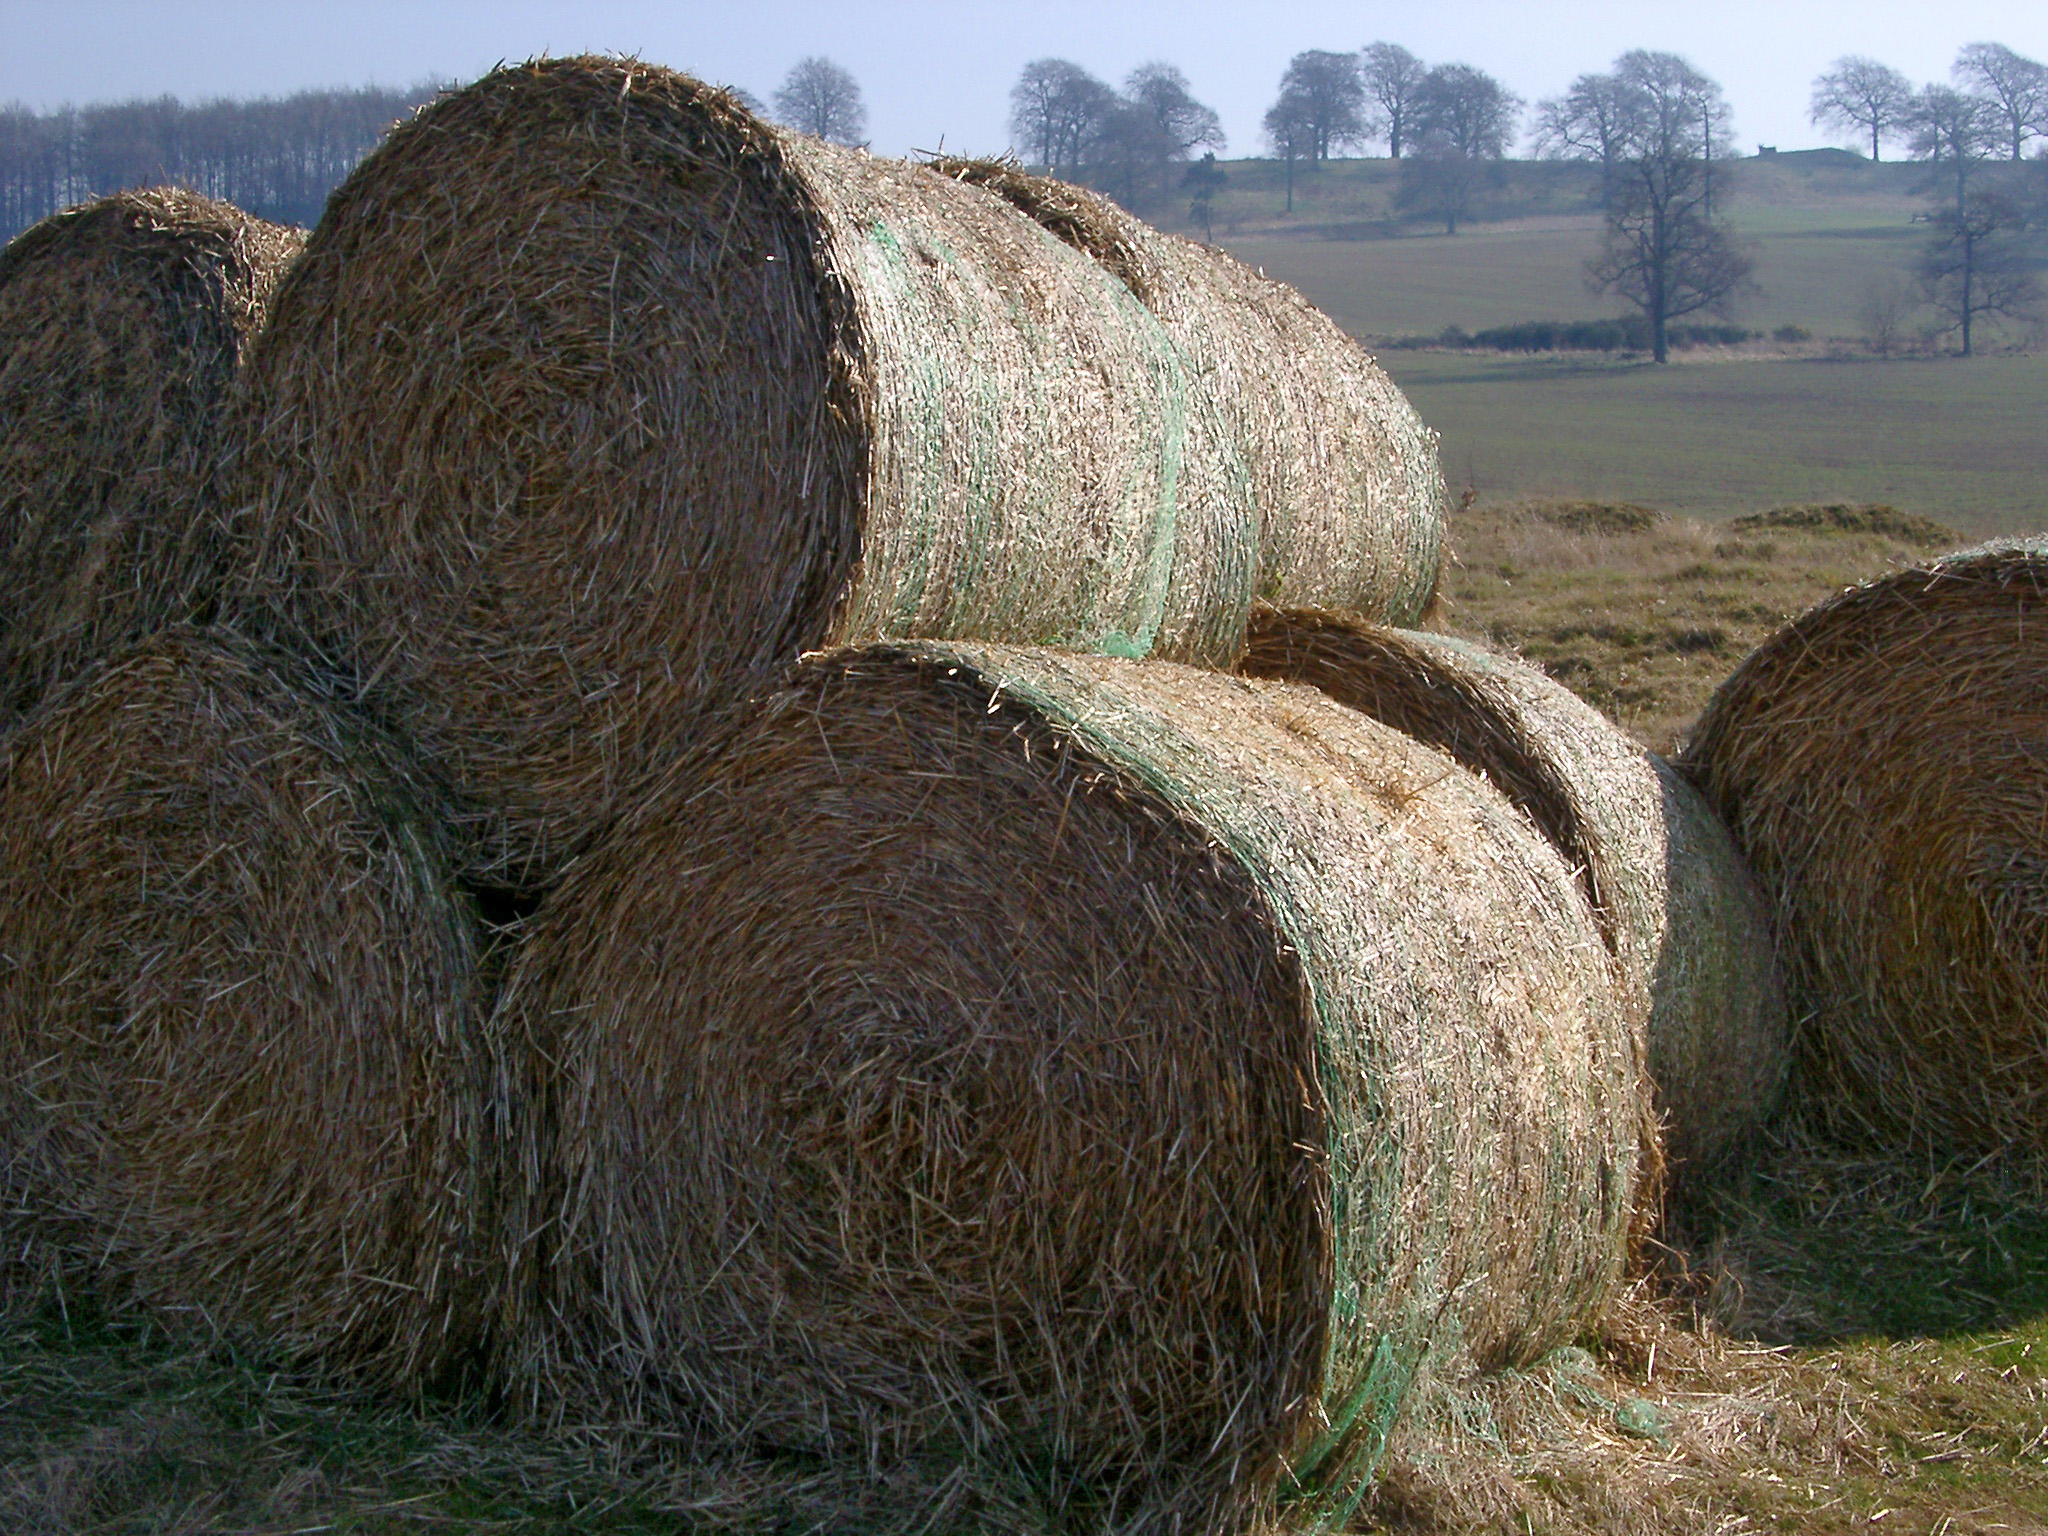 Round hay bales for winter livestock feed stacked in an agricultural field in...